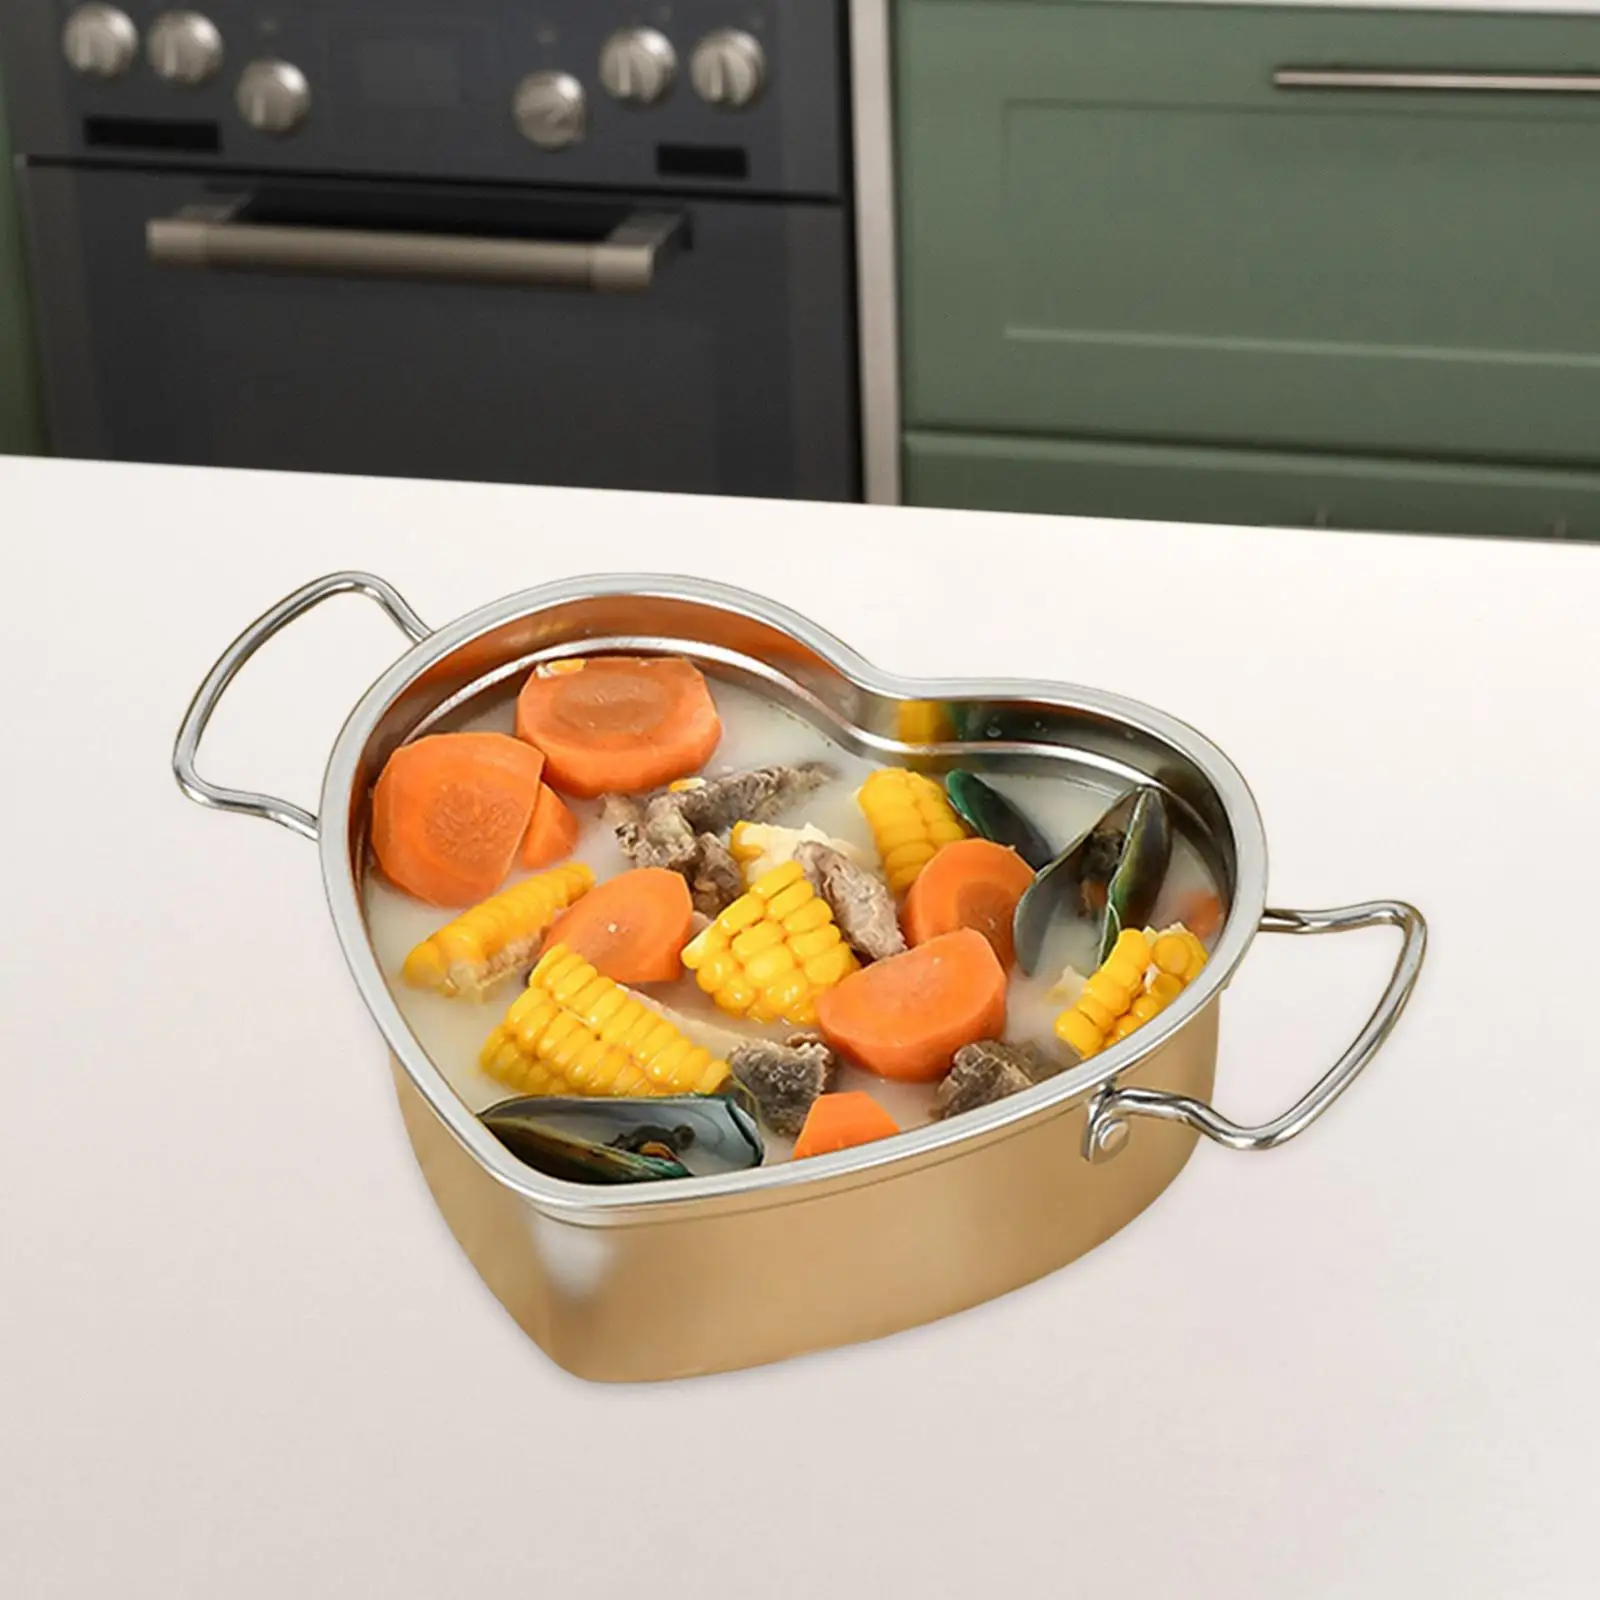 304 Stainless Steel Stockpot with Doubles Handle for Alltop Restaurant